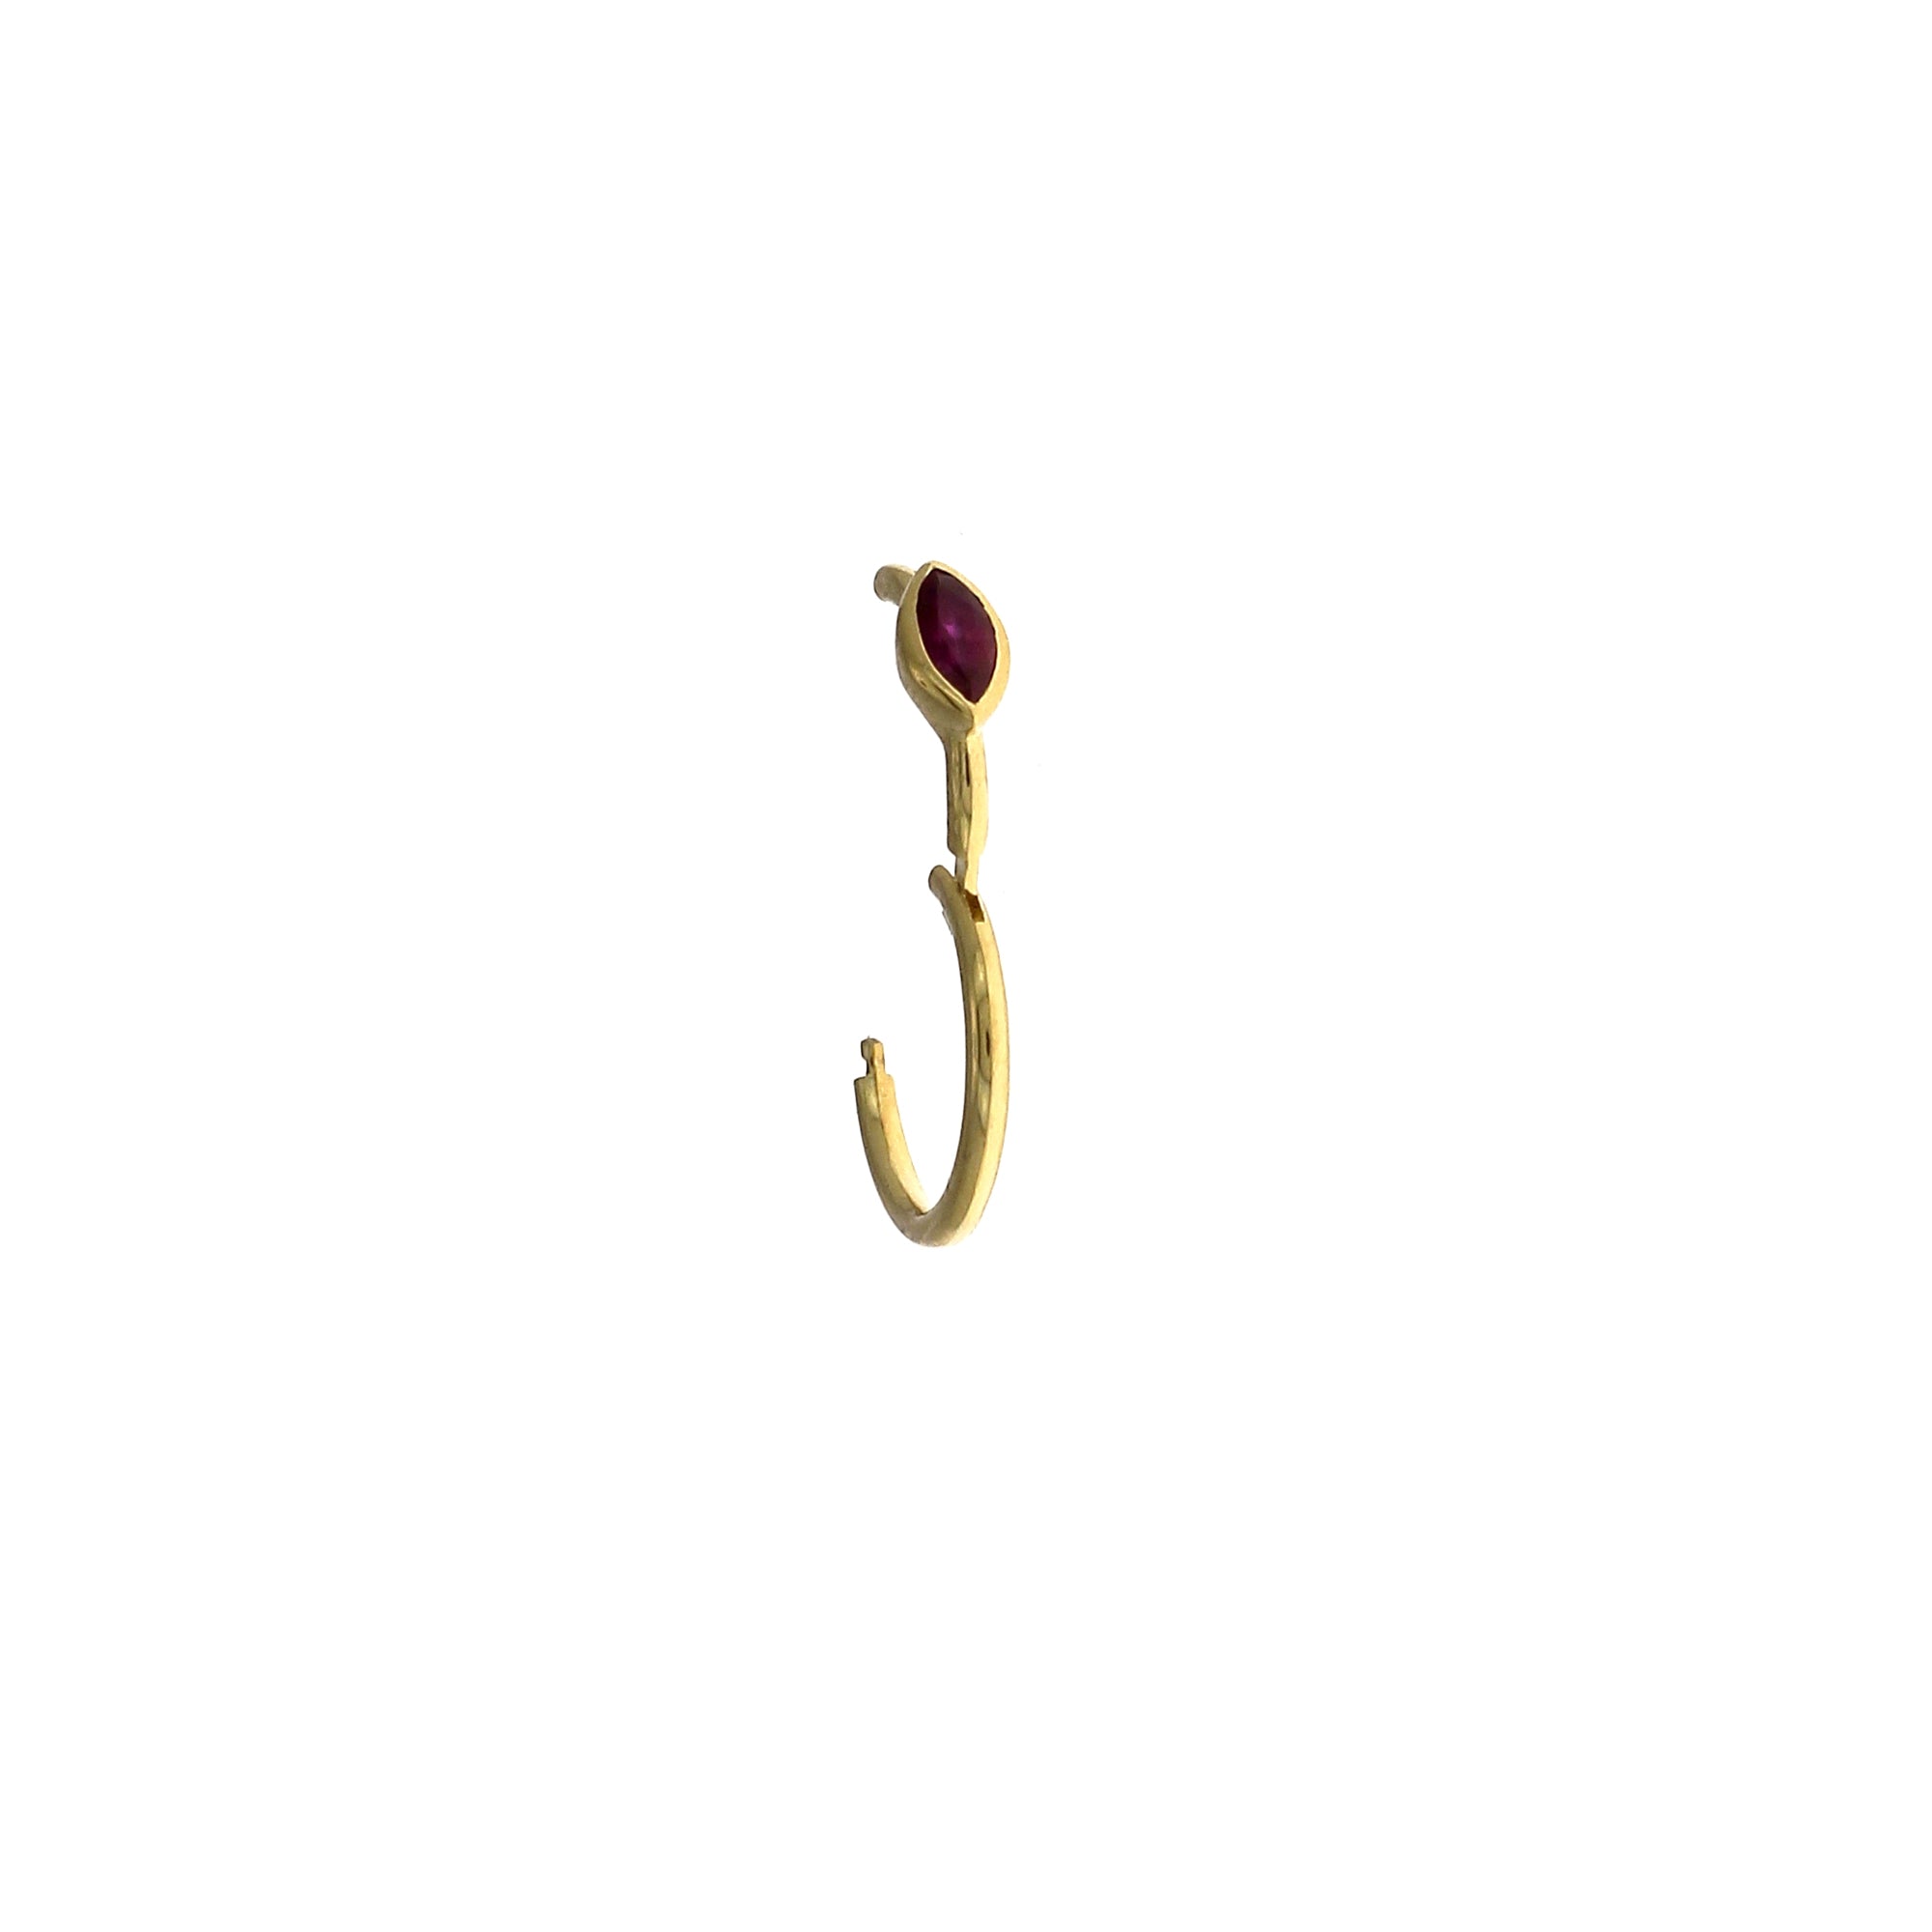 Créole 8mm Rubis Marquise 3x2mm Or Jaune